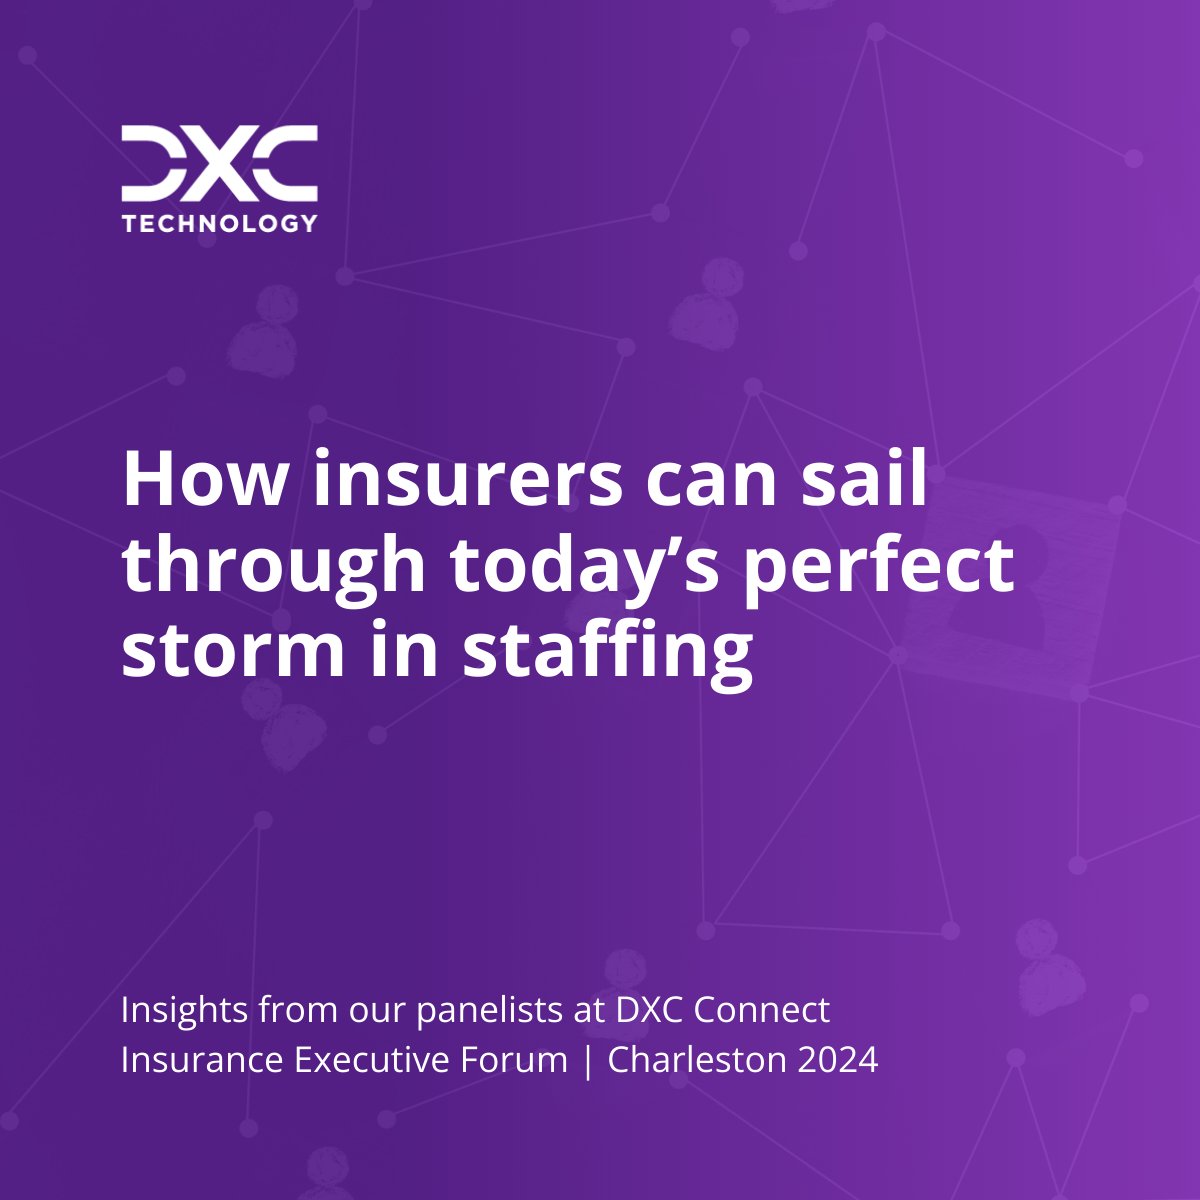 Struggling to find tech #talent for your insurance company? Industry experts from DXC, Celent and KPMG discuss tactics to counter this perfect storm. 
Learn more at dxc.to/4aFx8o0 
#DXCInsurance #InsuranceSoftware #InsuranceBPS #ManagedServices